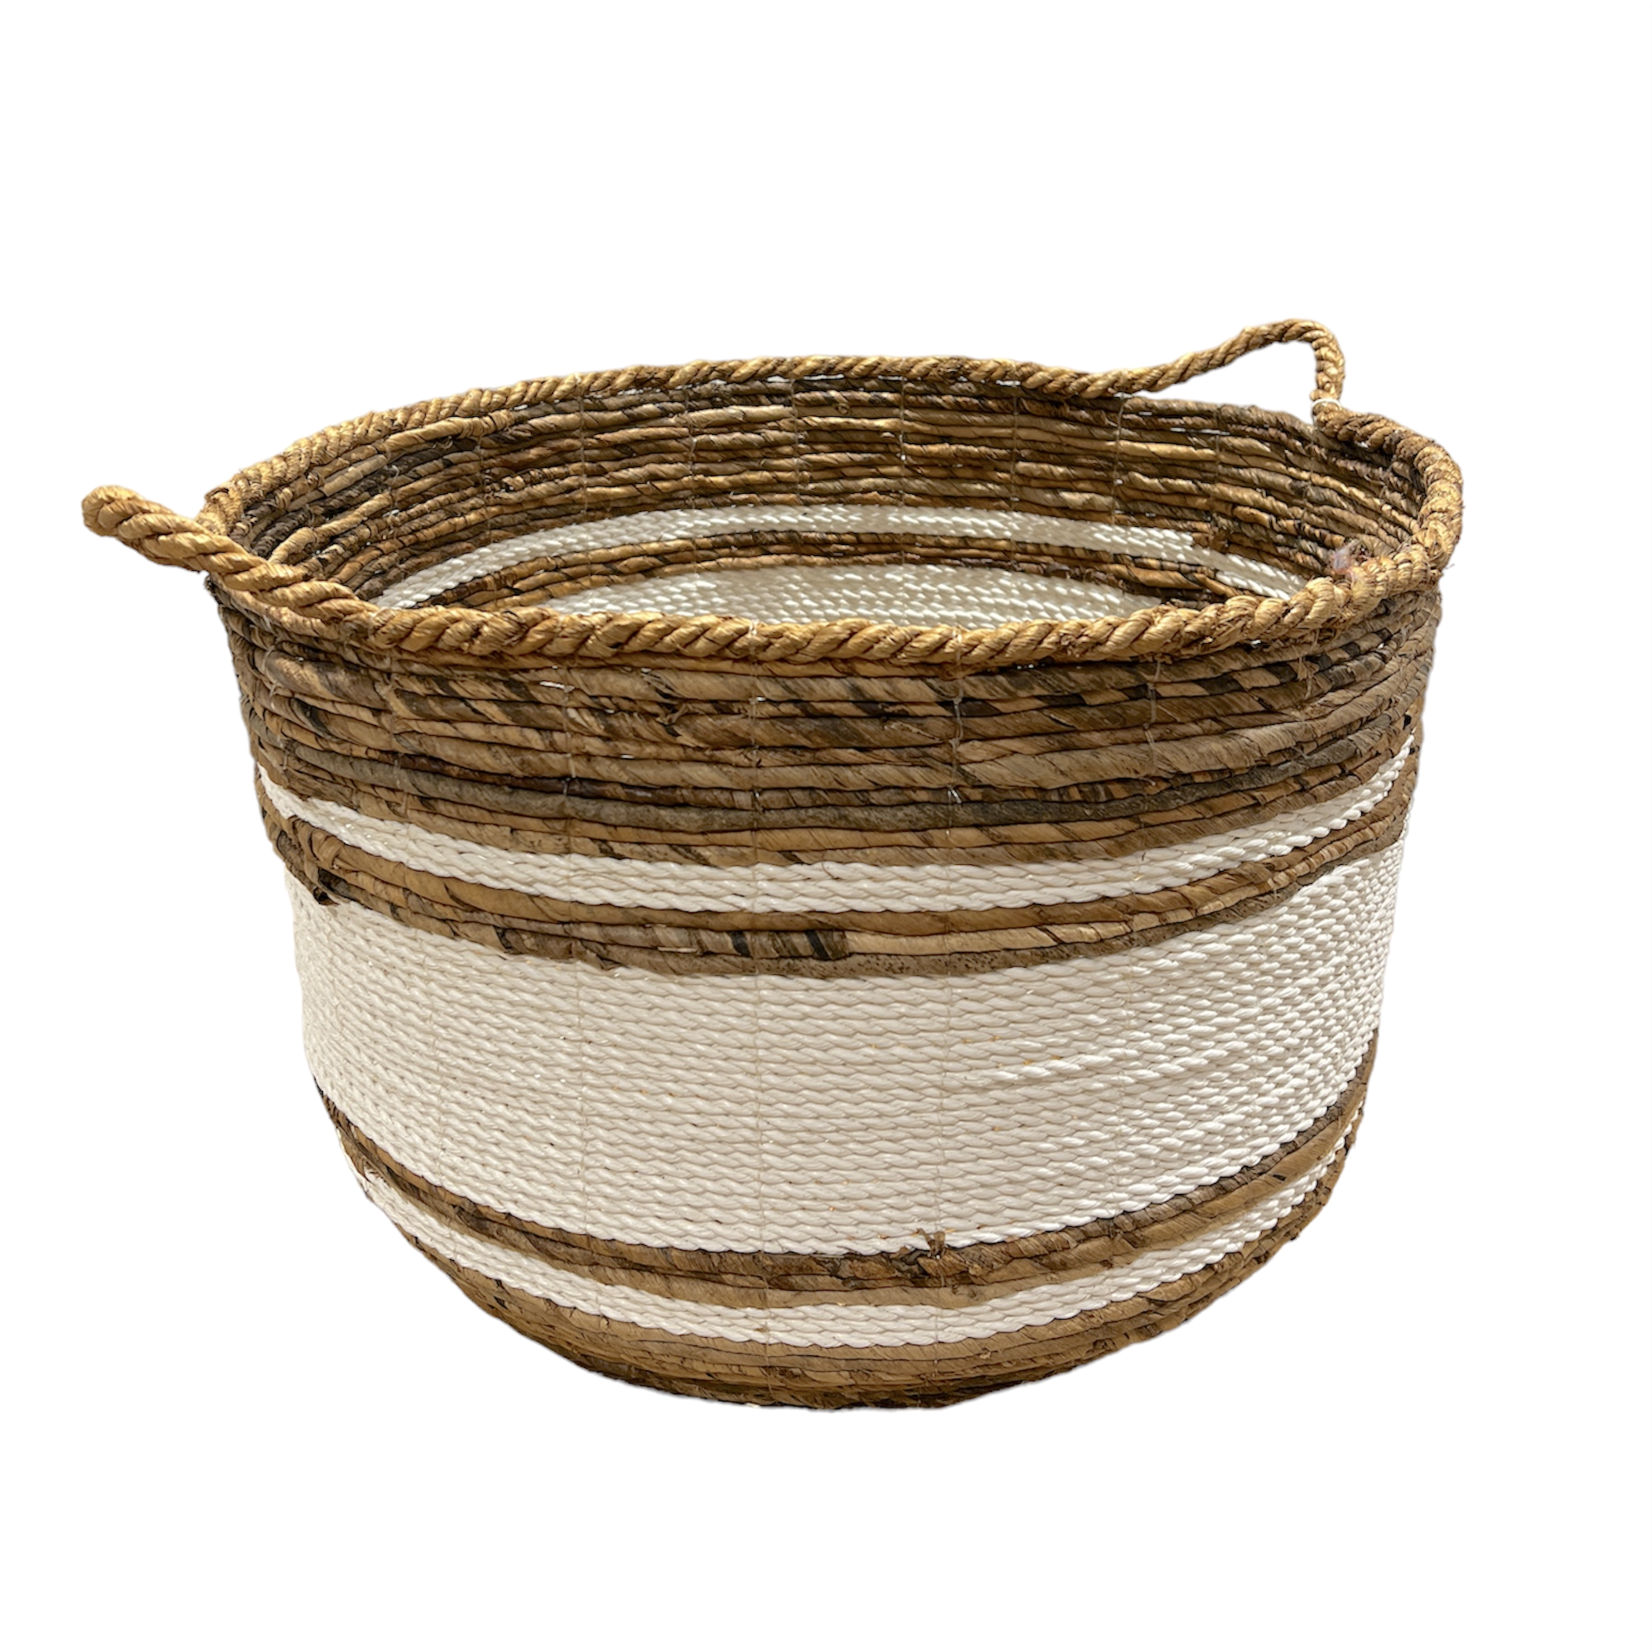 Outside The Box 20x13 Natural Seagrass Hand-woven Square Basket